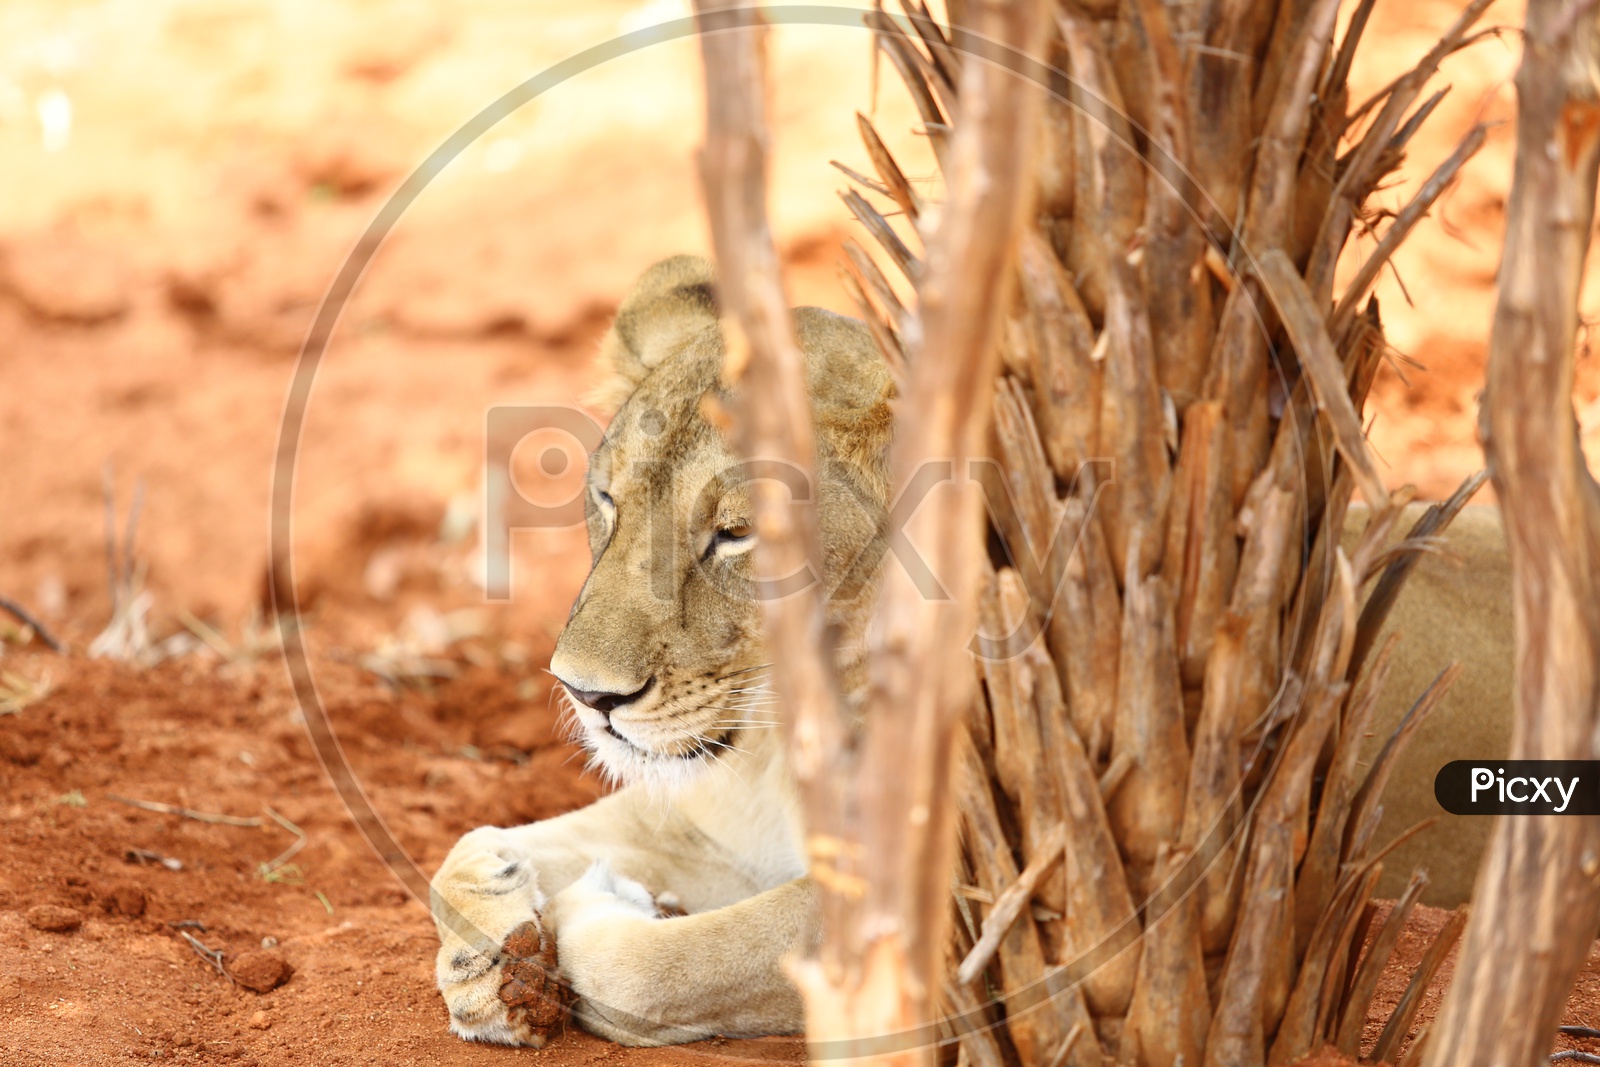 Lion Cub In a Zoo